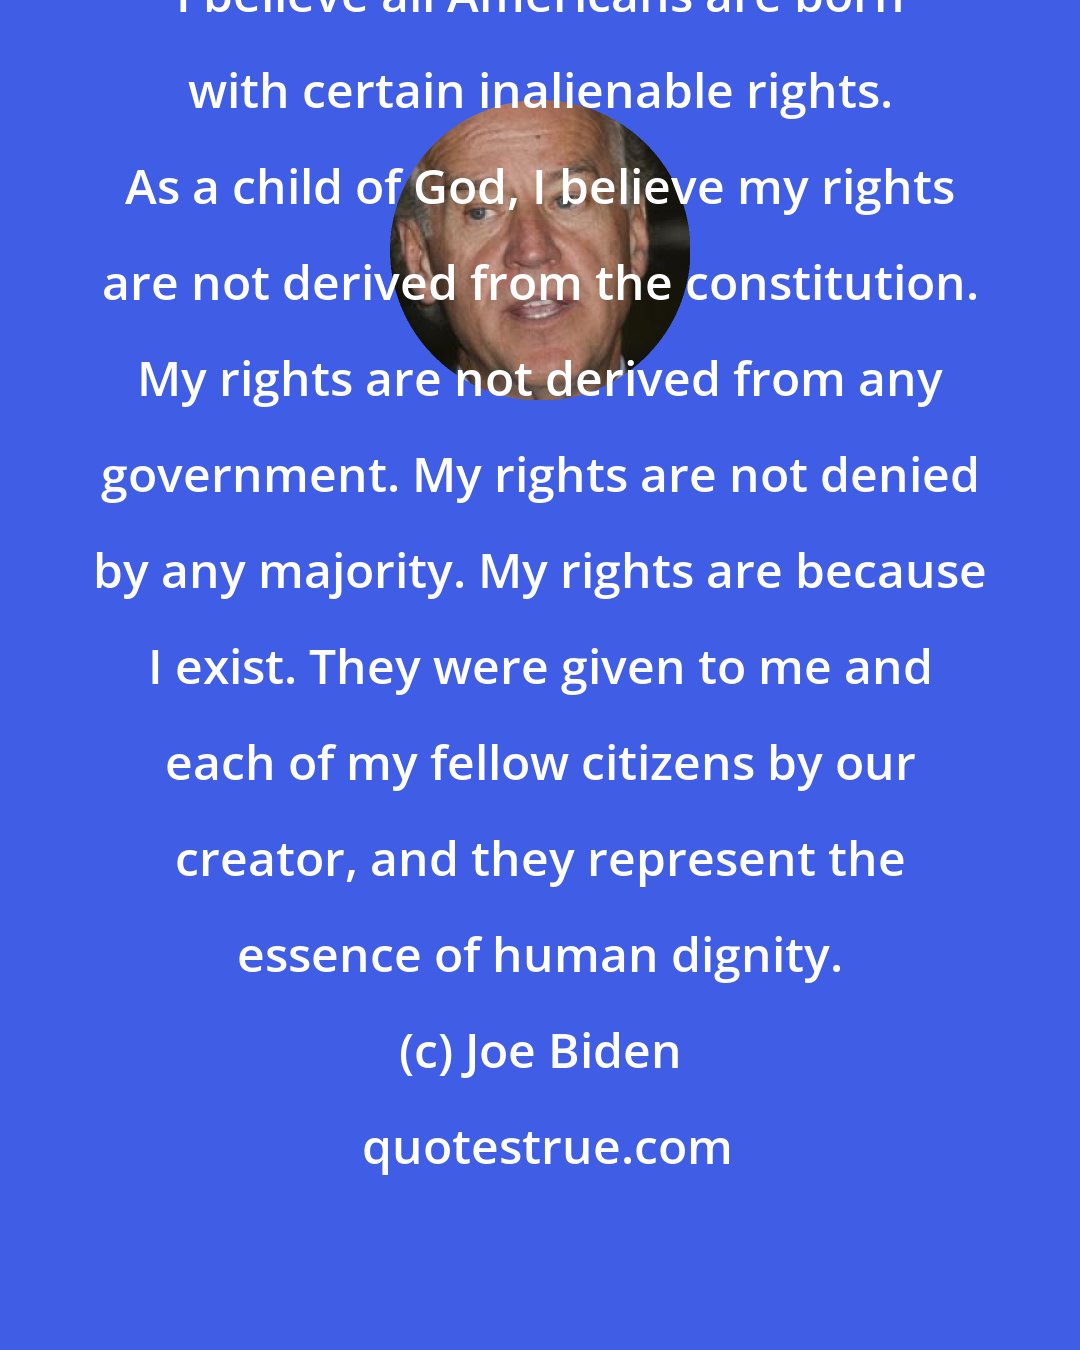 Joe Biden: I believe all Americans are born with certain inalienable rights. As a child of God, I believe my rights are not derived from the constitution. My rights are not derived from any government. My rights are not denied by any majority. My rights are because I exist. They were given to me and each of my fellow citizens by our creator, and they represent the essence of human dignity.